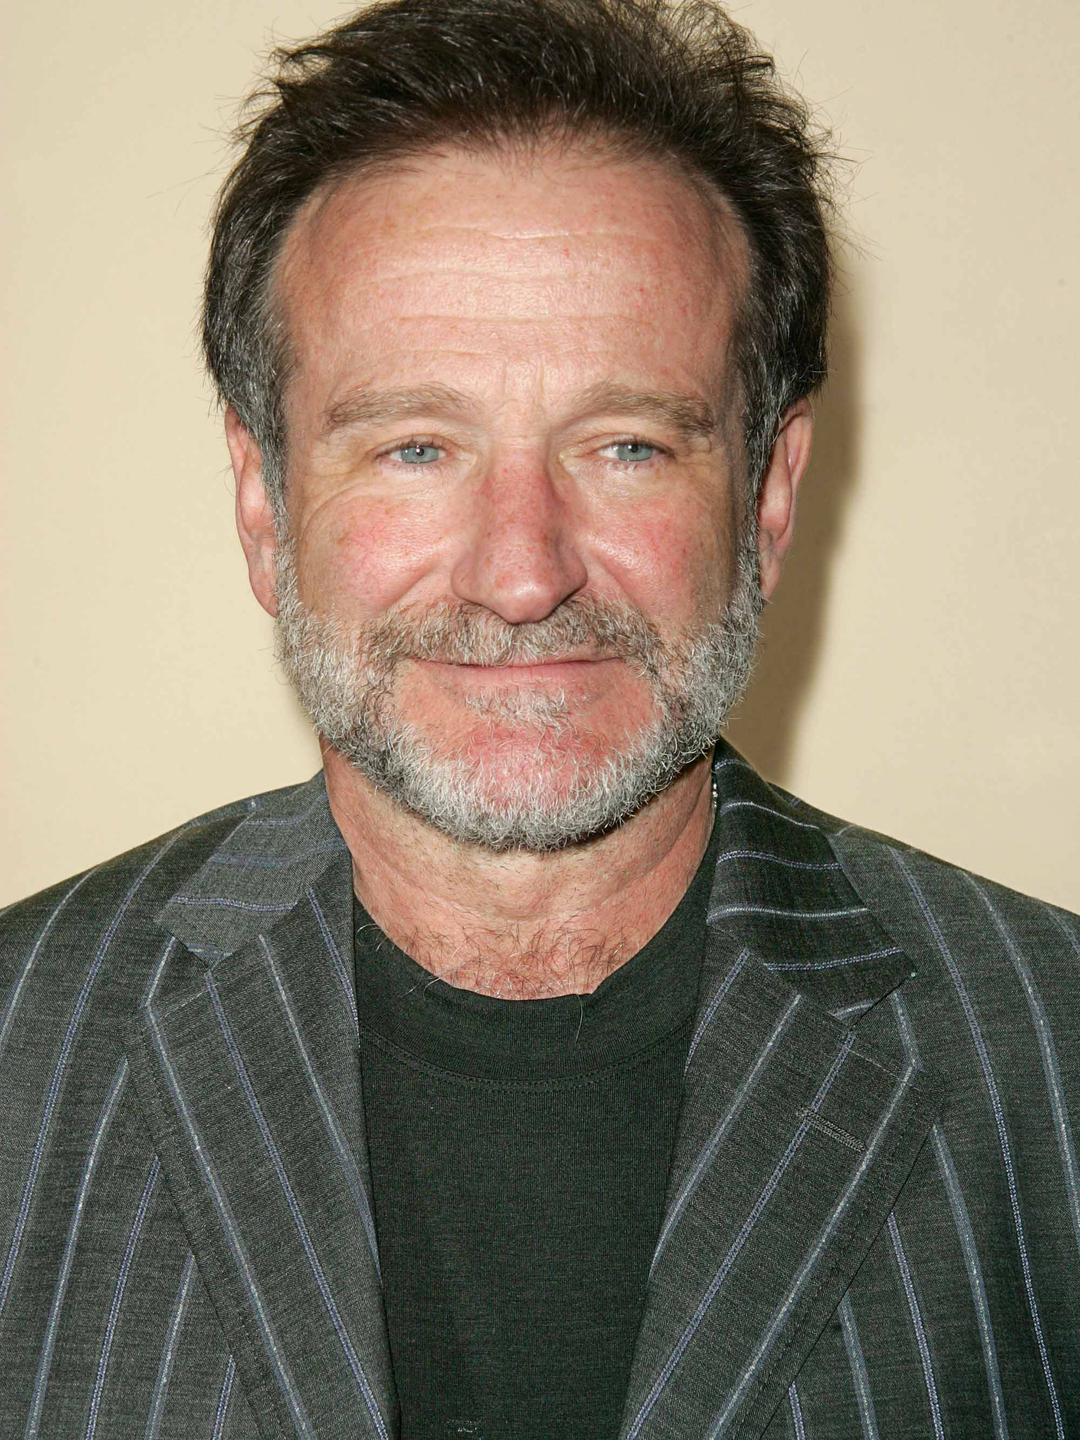 Robin Williams young age